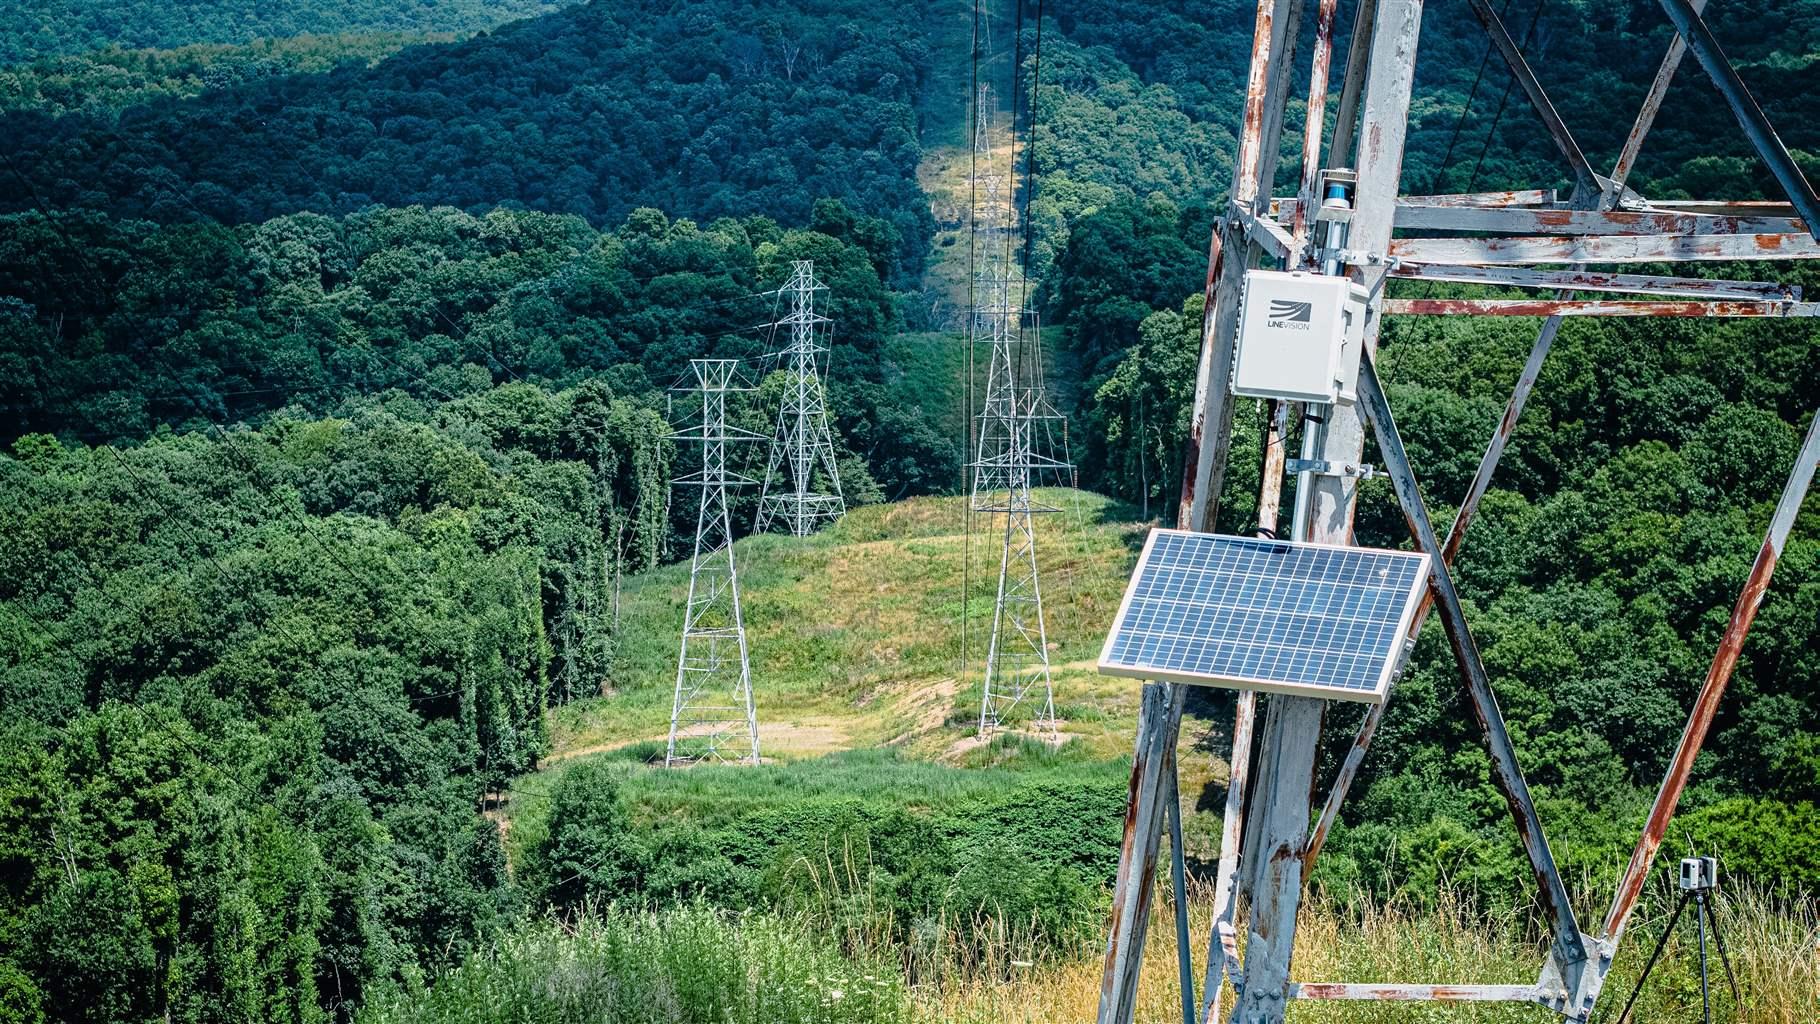 A hilly area covered in green grass and trees with electric transmission towers in the background. In the foreground, a close-up of a panel-like sensor attached to a transmission tower. 